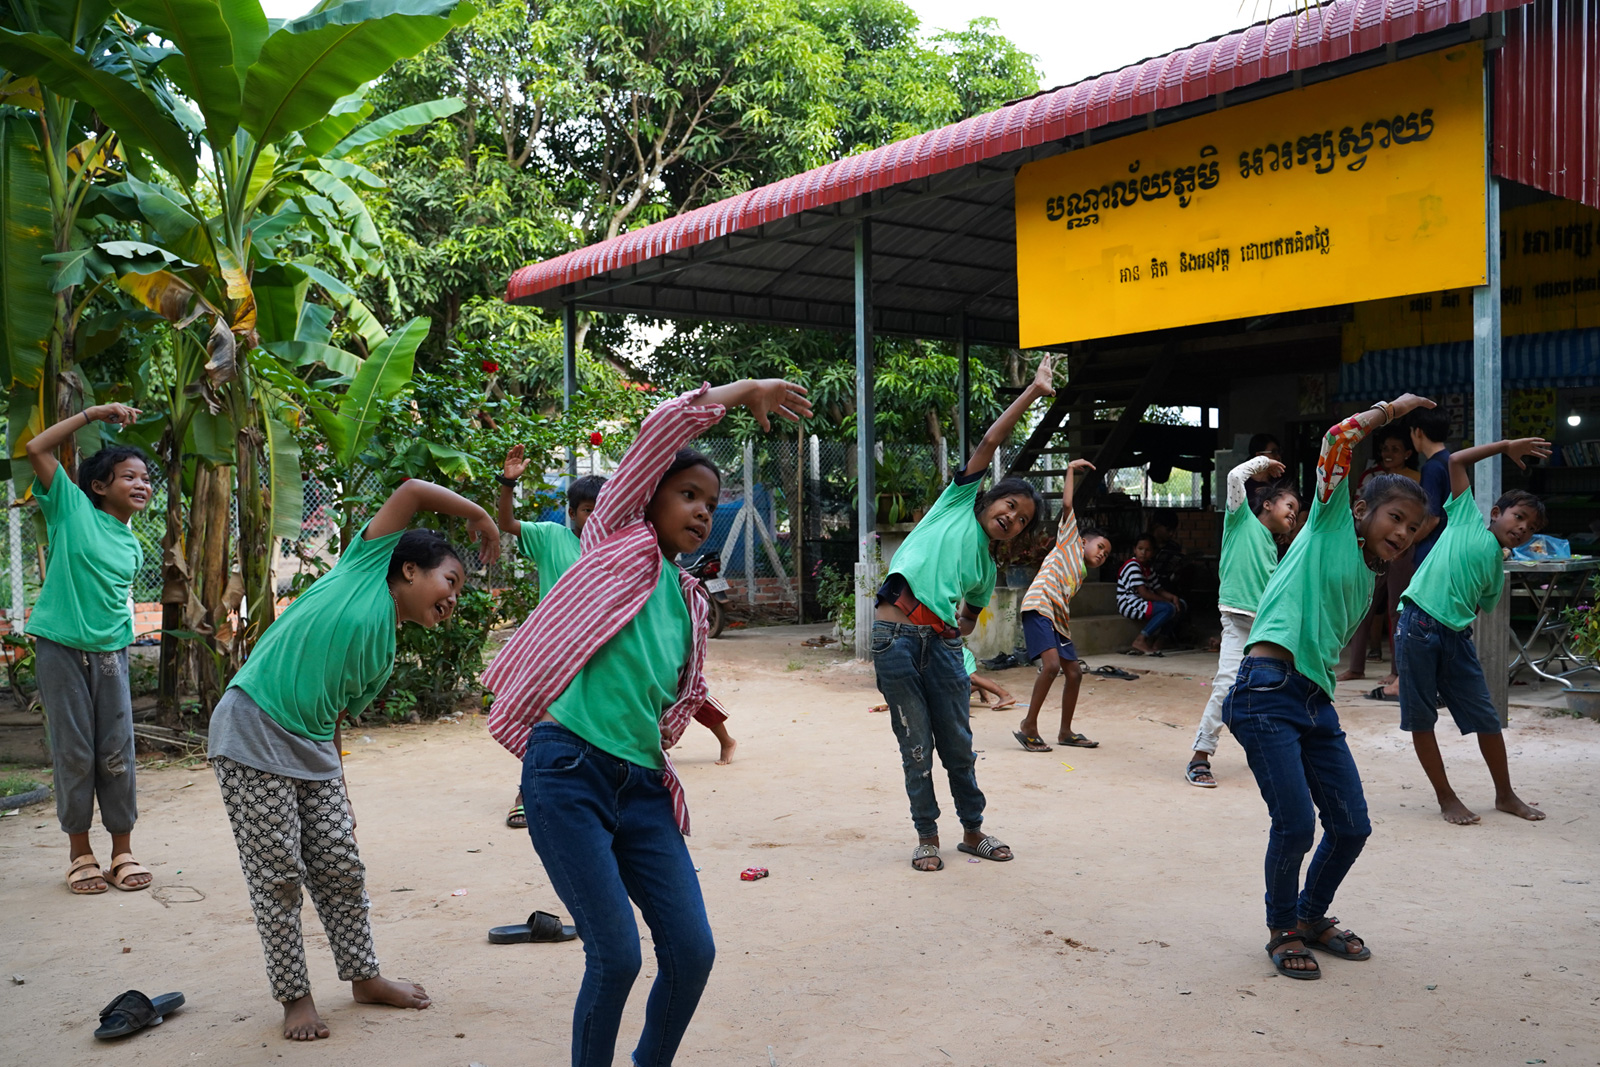 Children come to the Village Library in Areak Svay Village to read, write, draw, exercise and socialise. Students like to wear their green shirts, which were given by a donor, when they come to the library. “It’s like their uniform,” Bopha says.